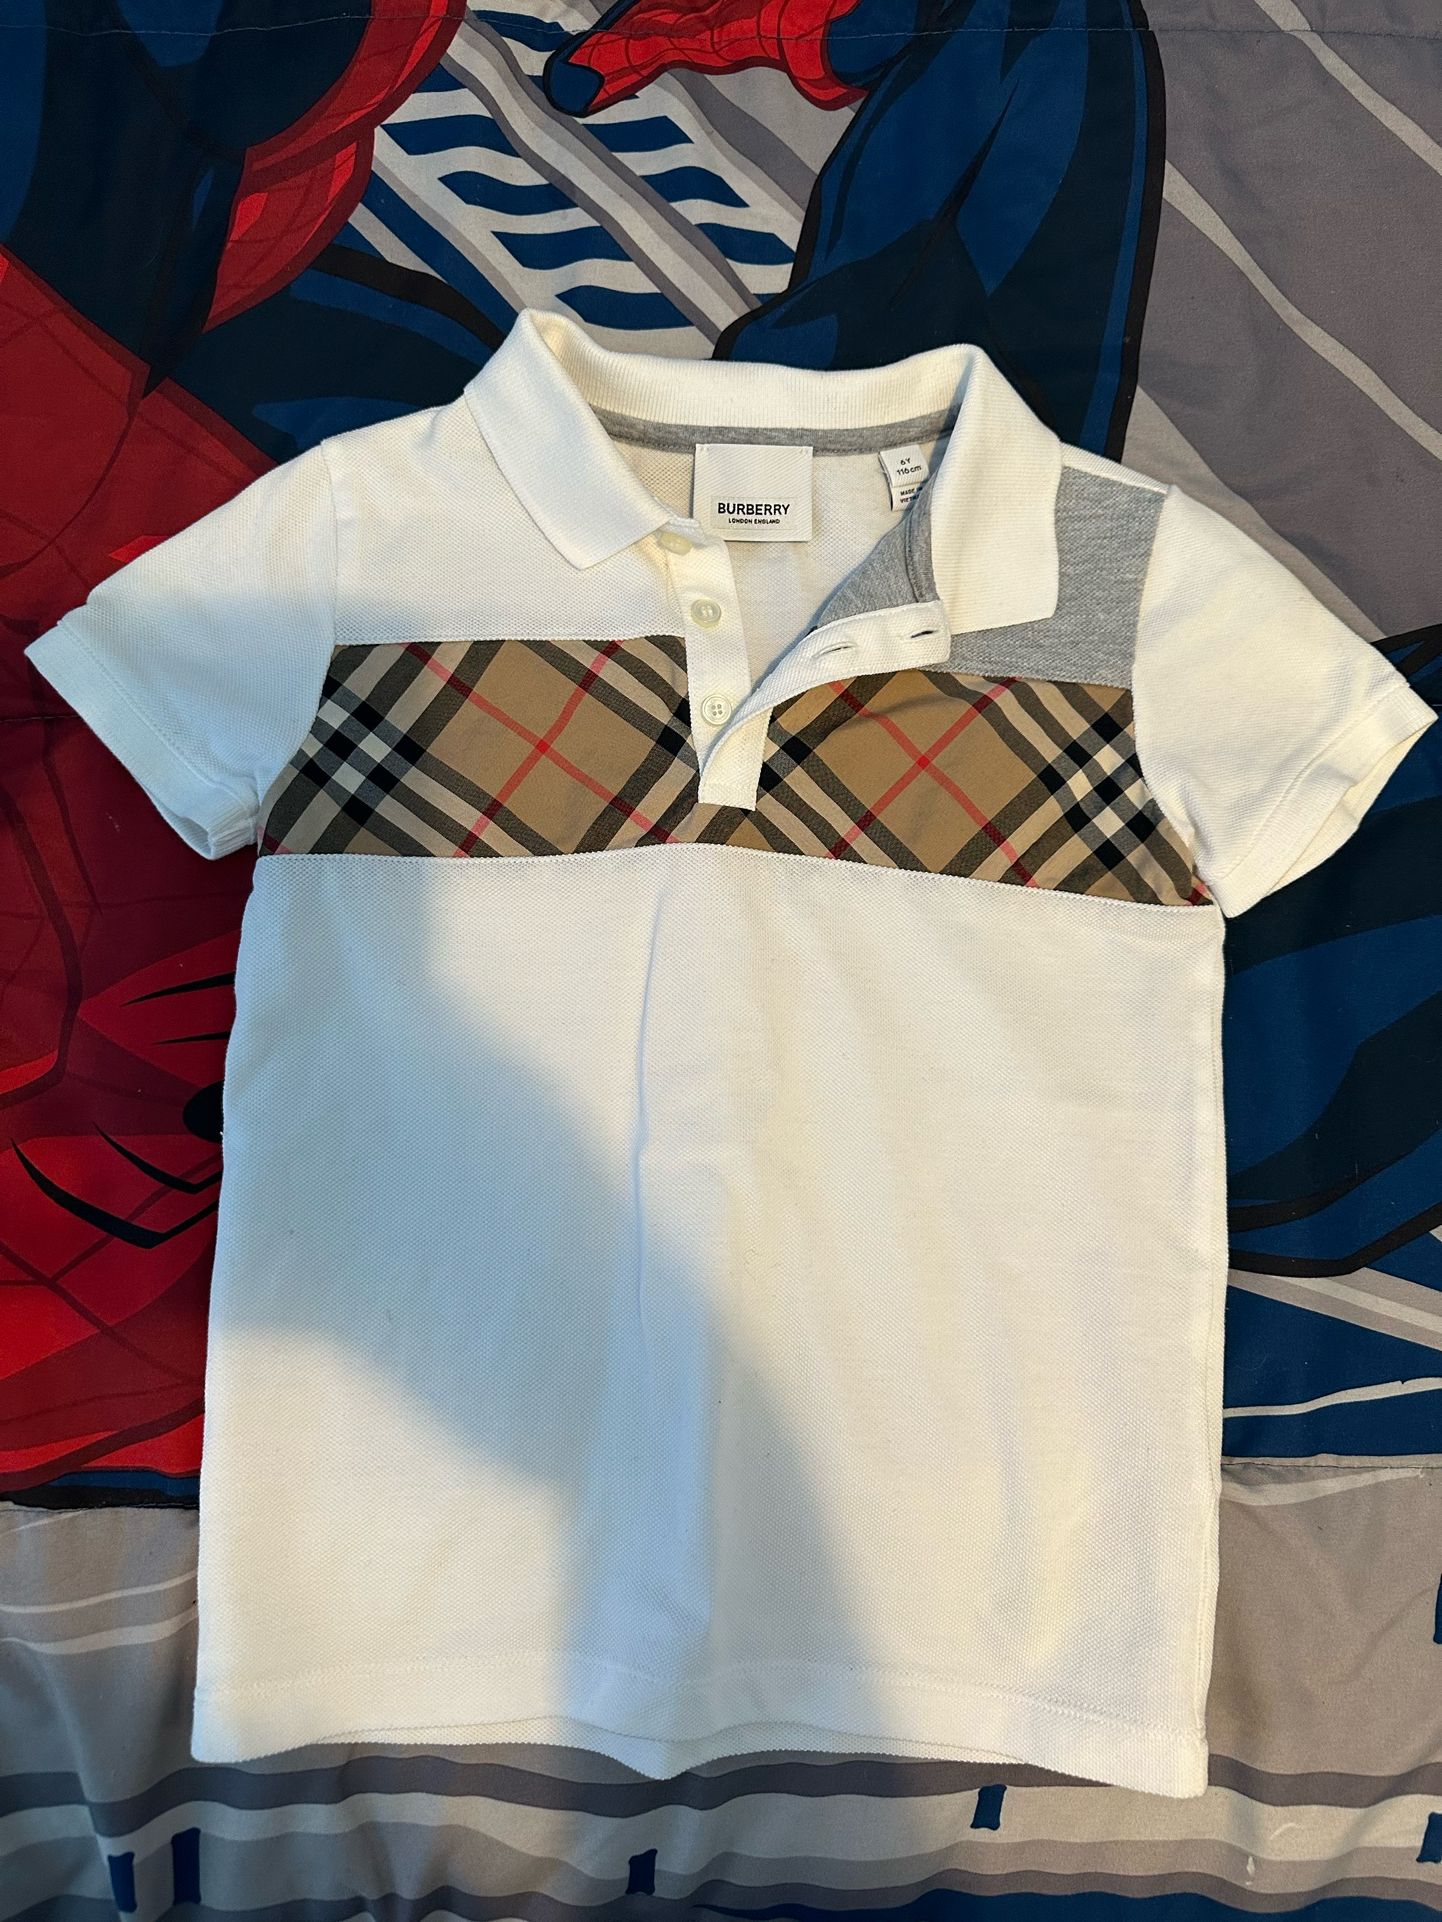 Kids Burberry Shirt Size 6y (worn once) 